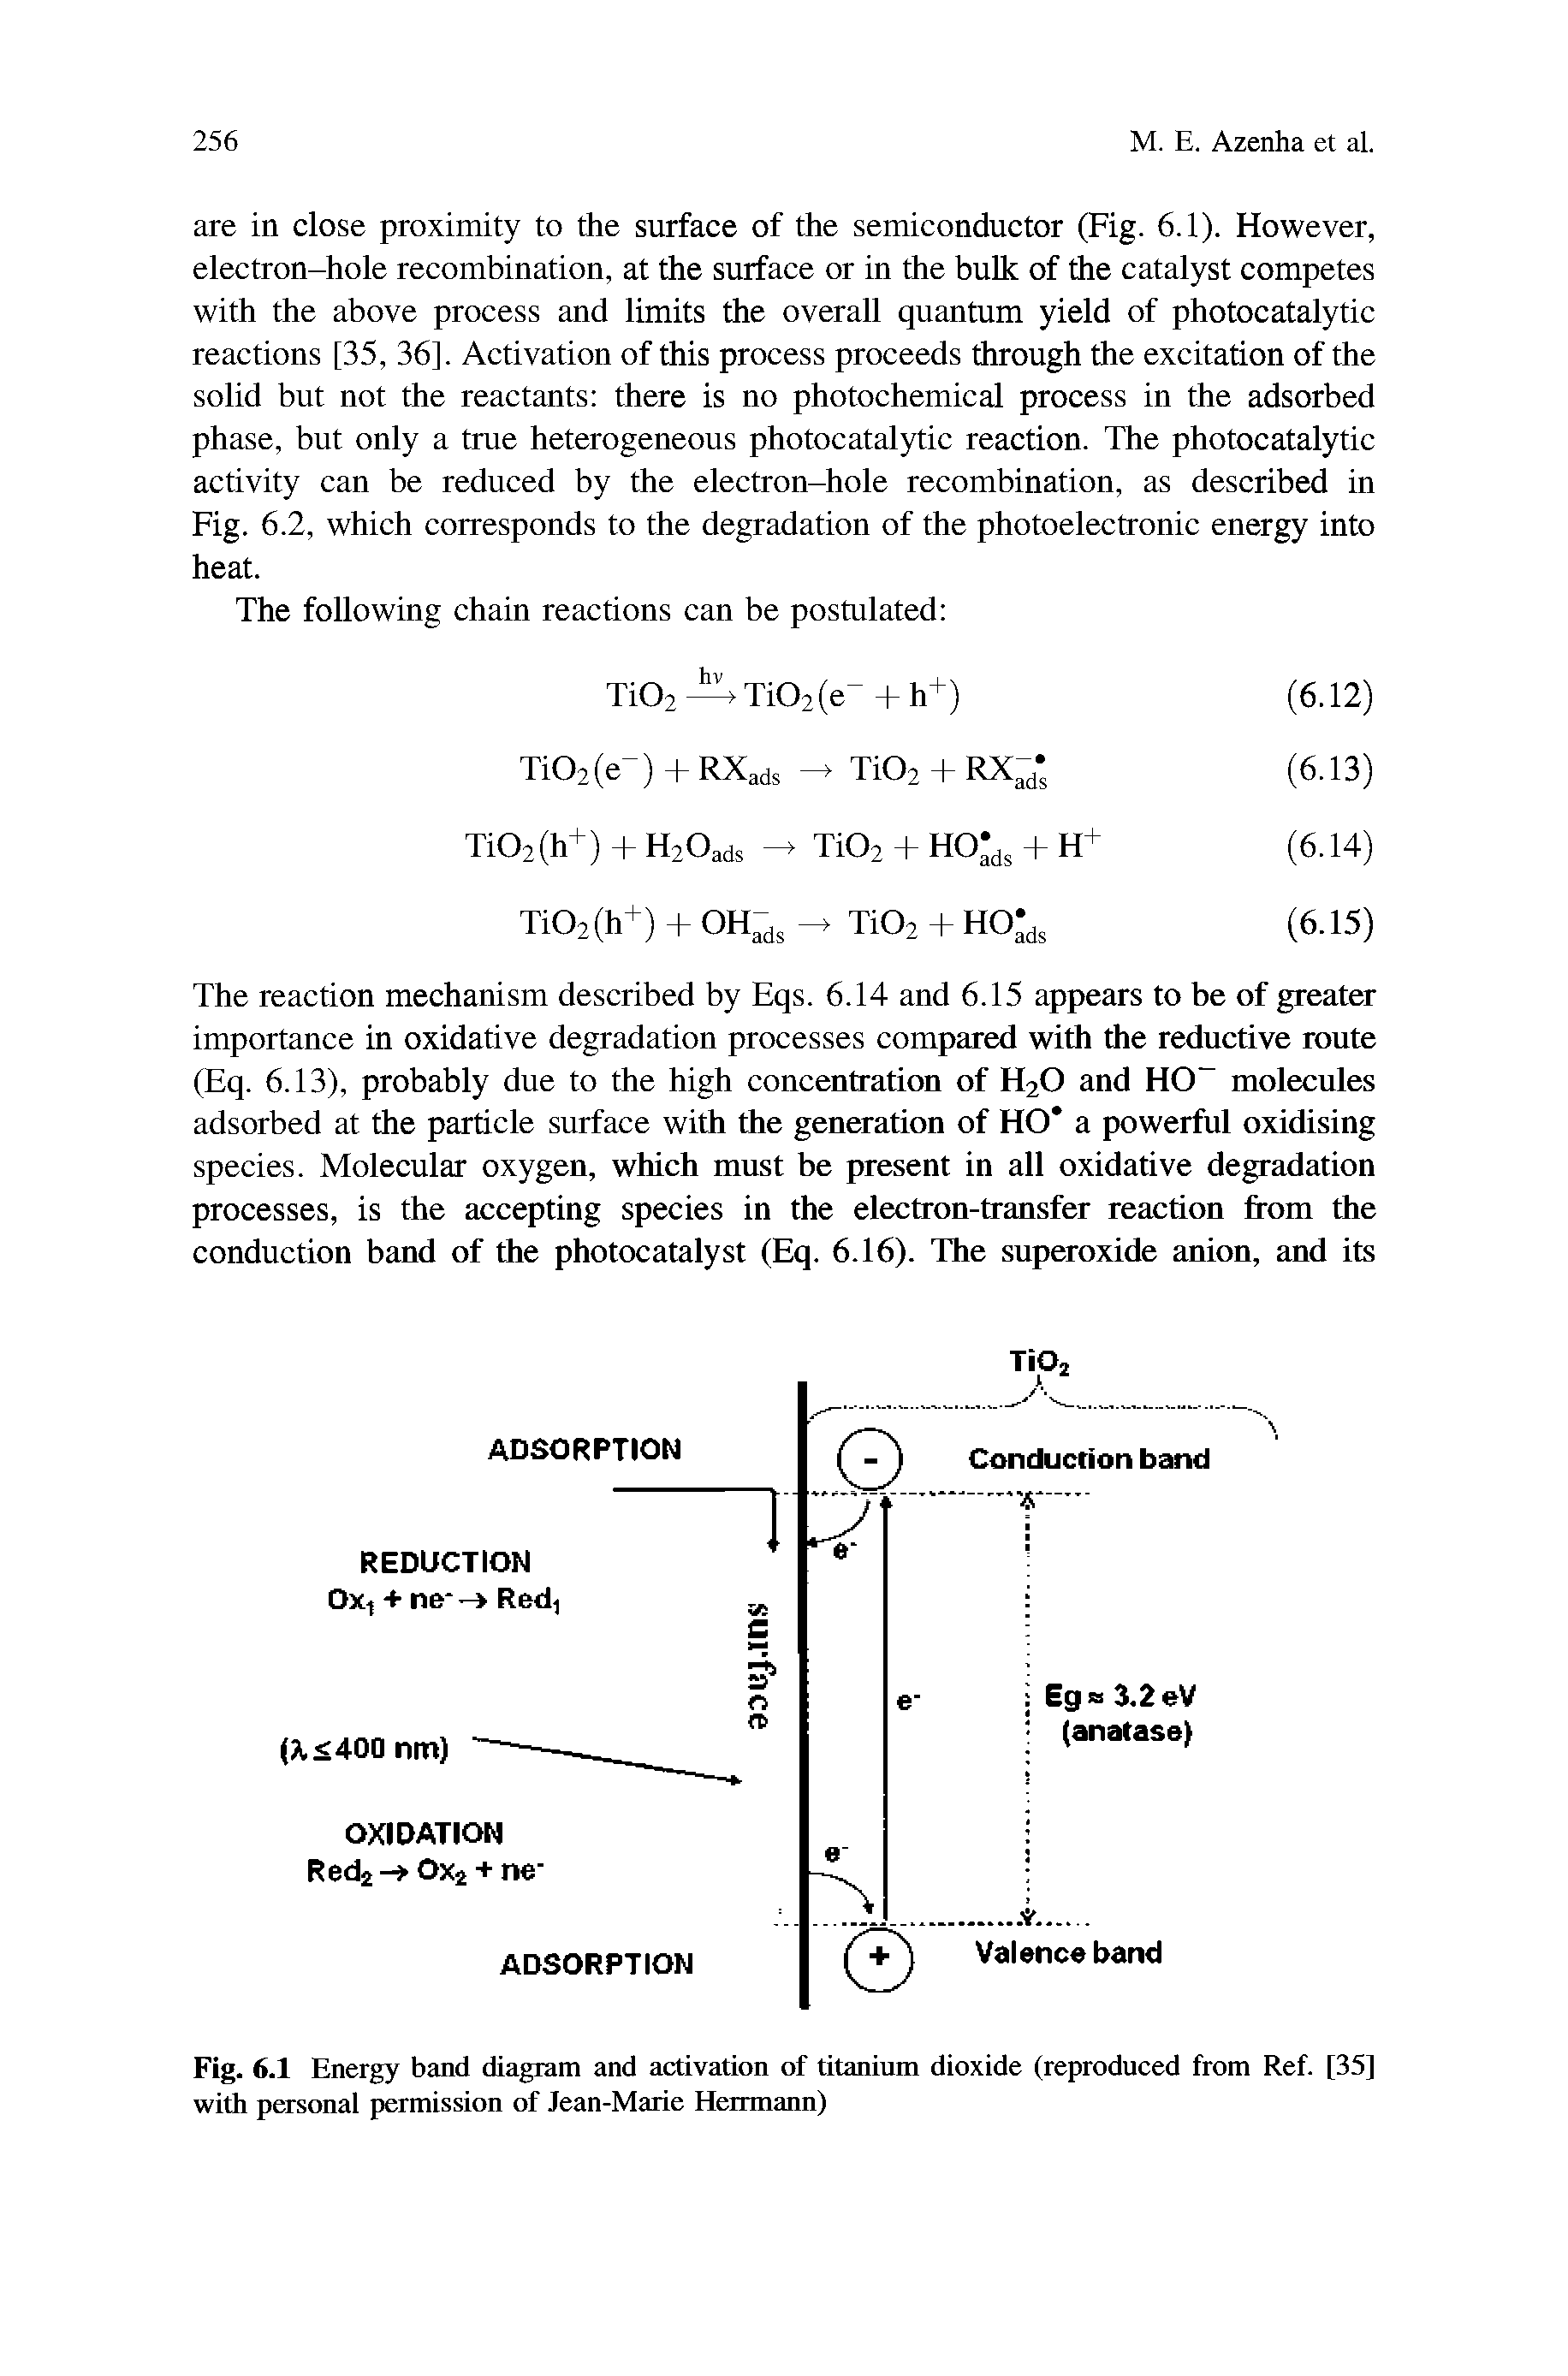 Fig. 6.1 Energy band diagram and activation of titanium dioxide (reproduced from Ref. [35] with personal permission of Jean-Marie Herrmann)...